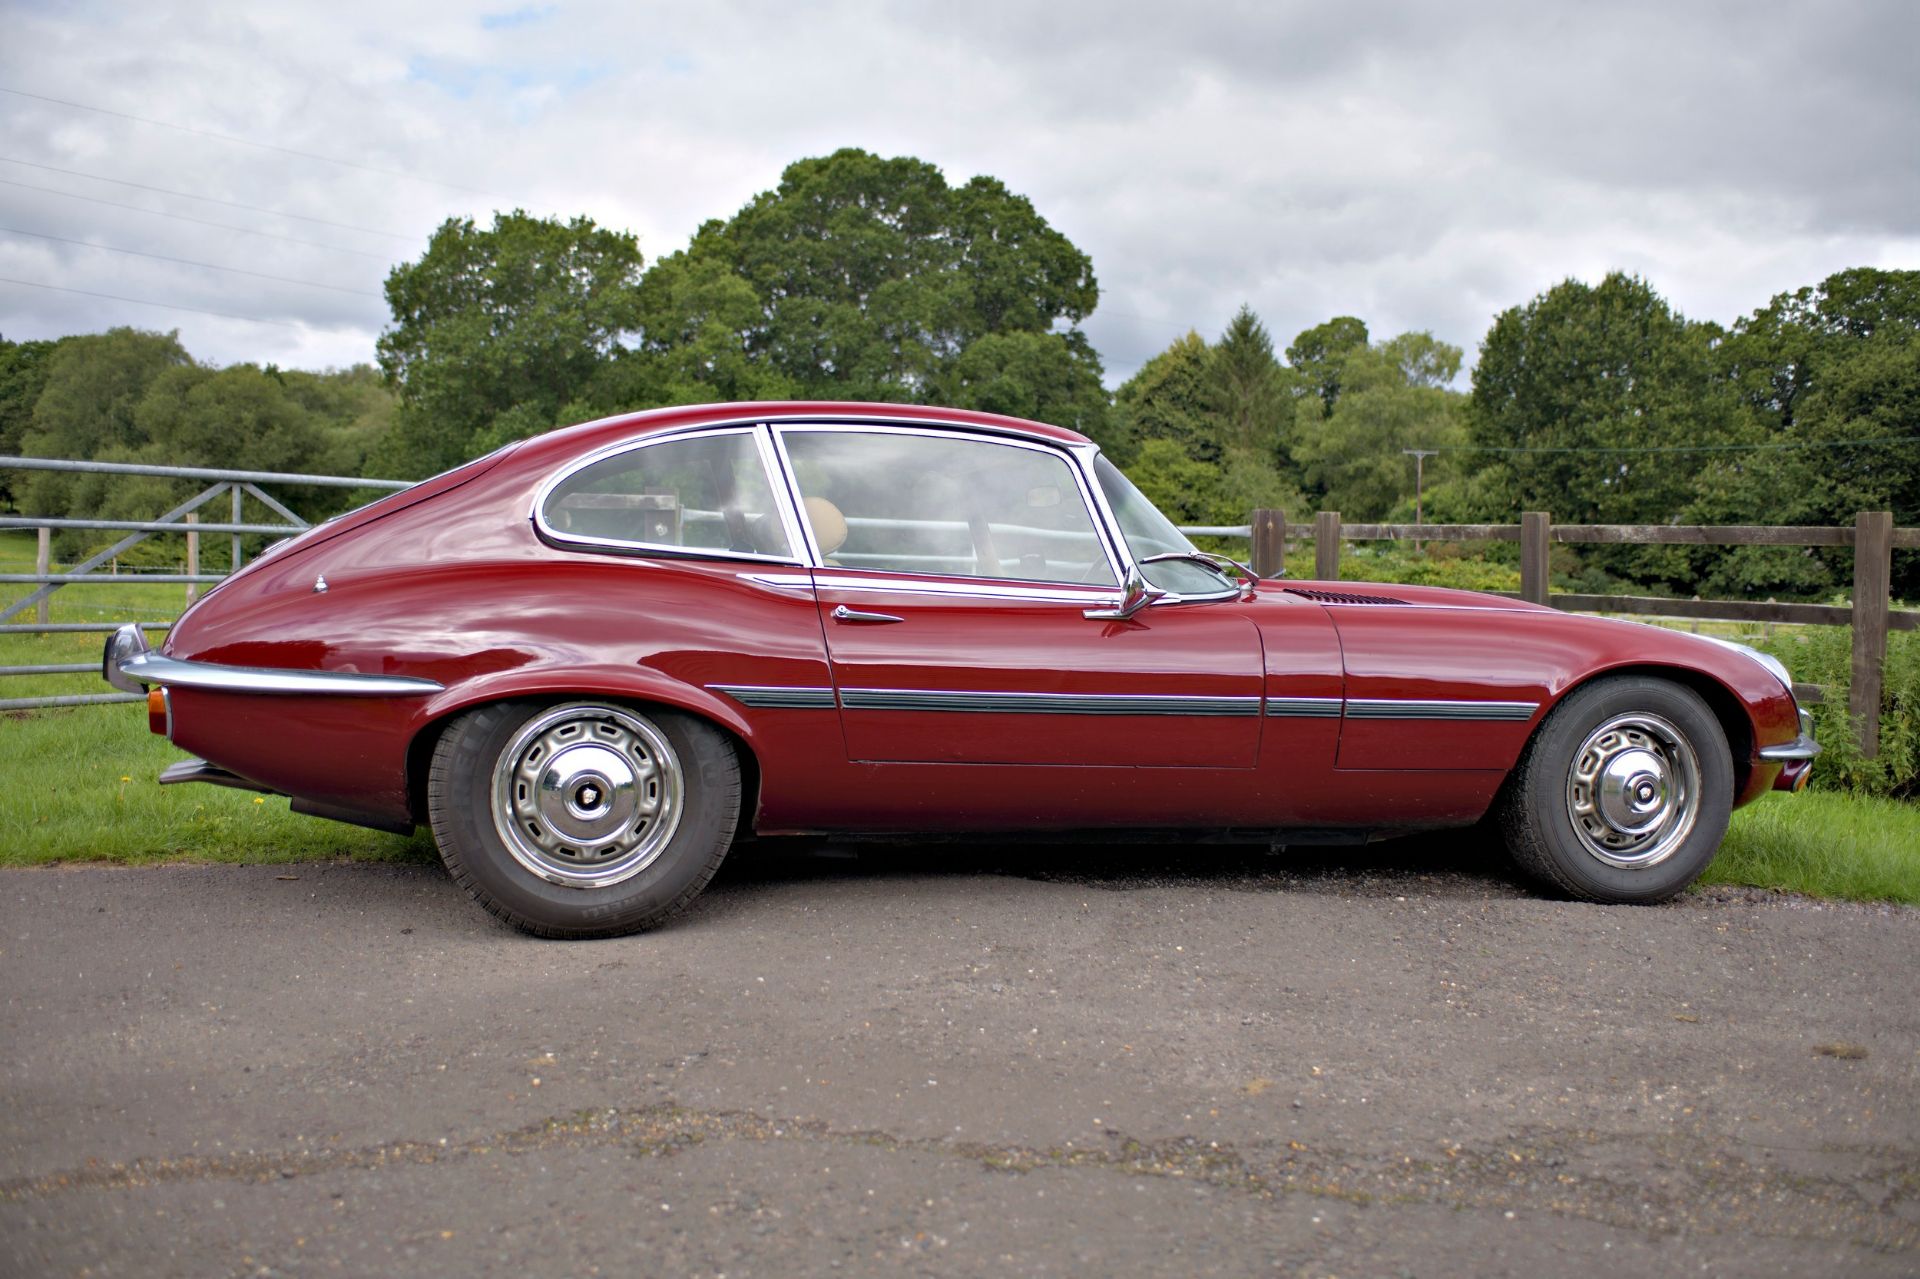 1972 JAGUAR E-TYPE SERIES III FIXED HEAD COUPE Registration: JAG 947 - Image 3 of 36